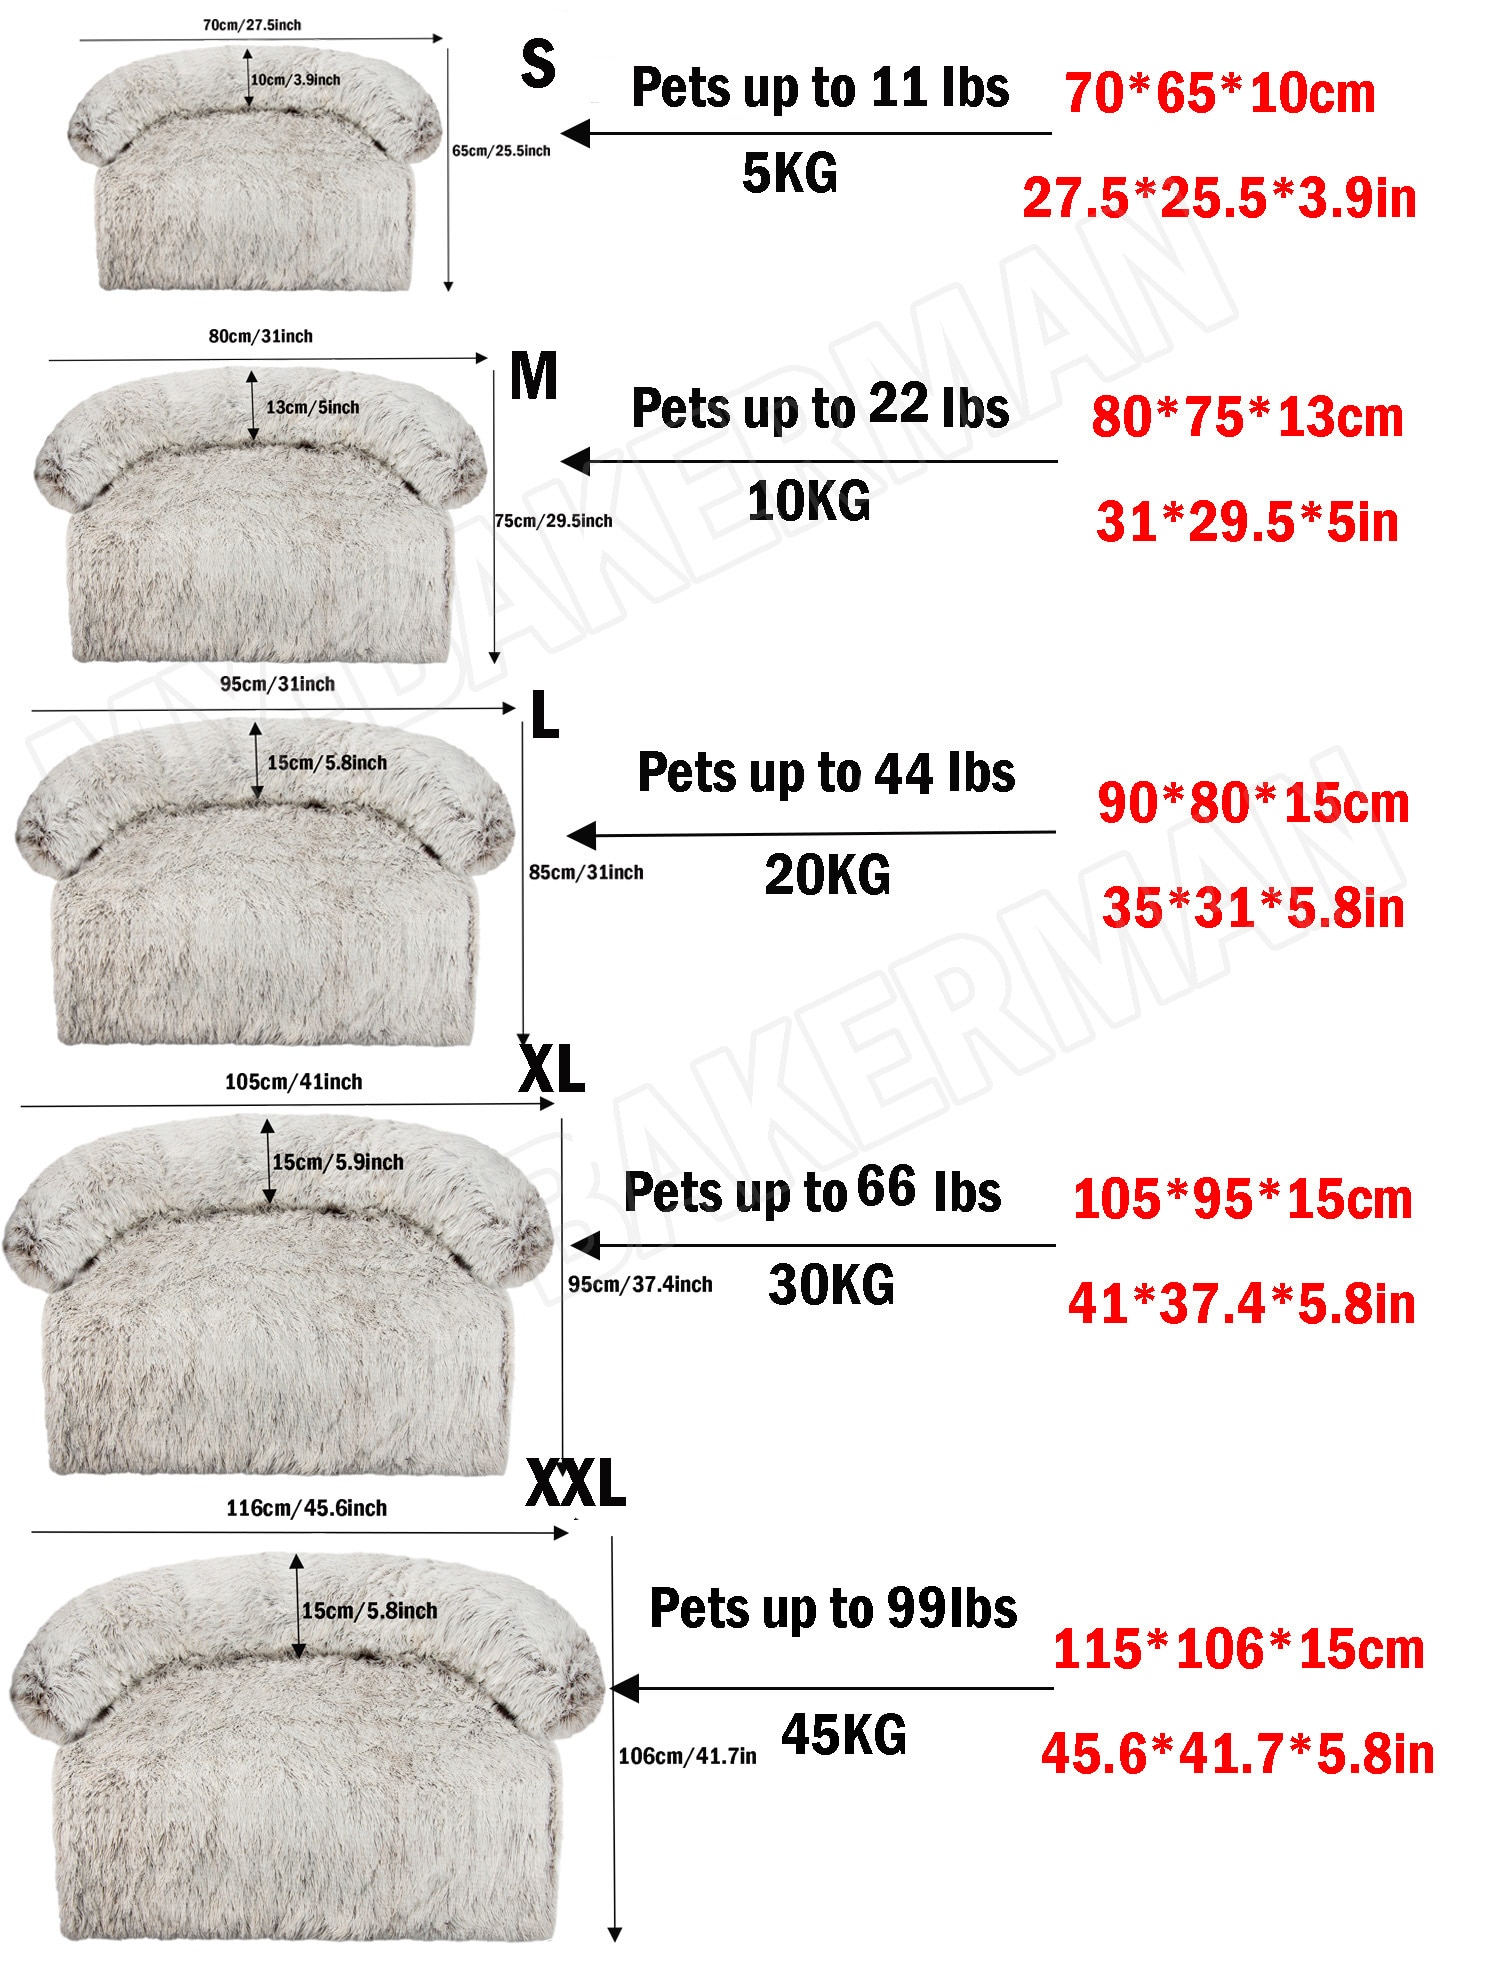 842101745 1 - Large Plush Dog Sofa Bed Couch Protector - thepamperedpooch-co, pet-beds, dog-beds